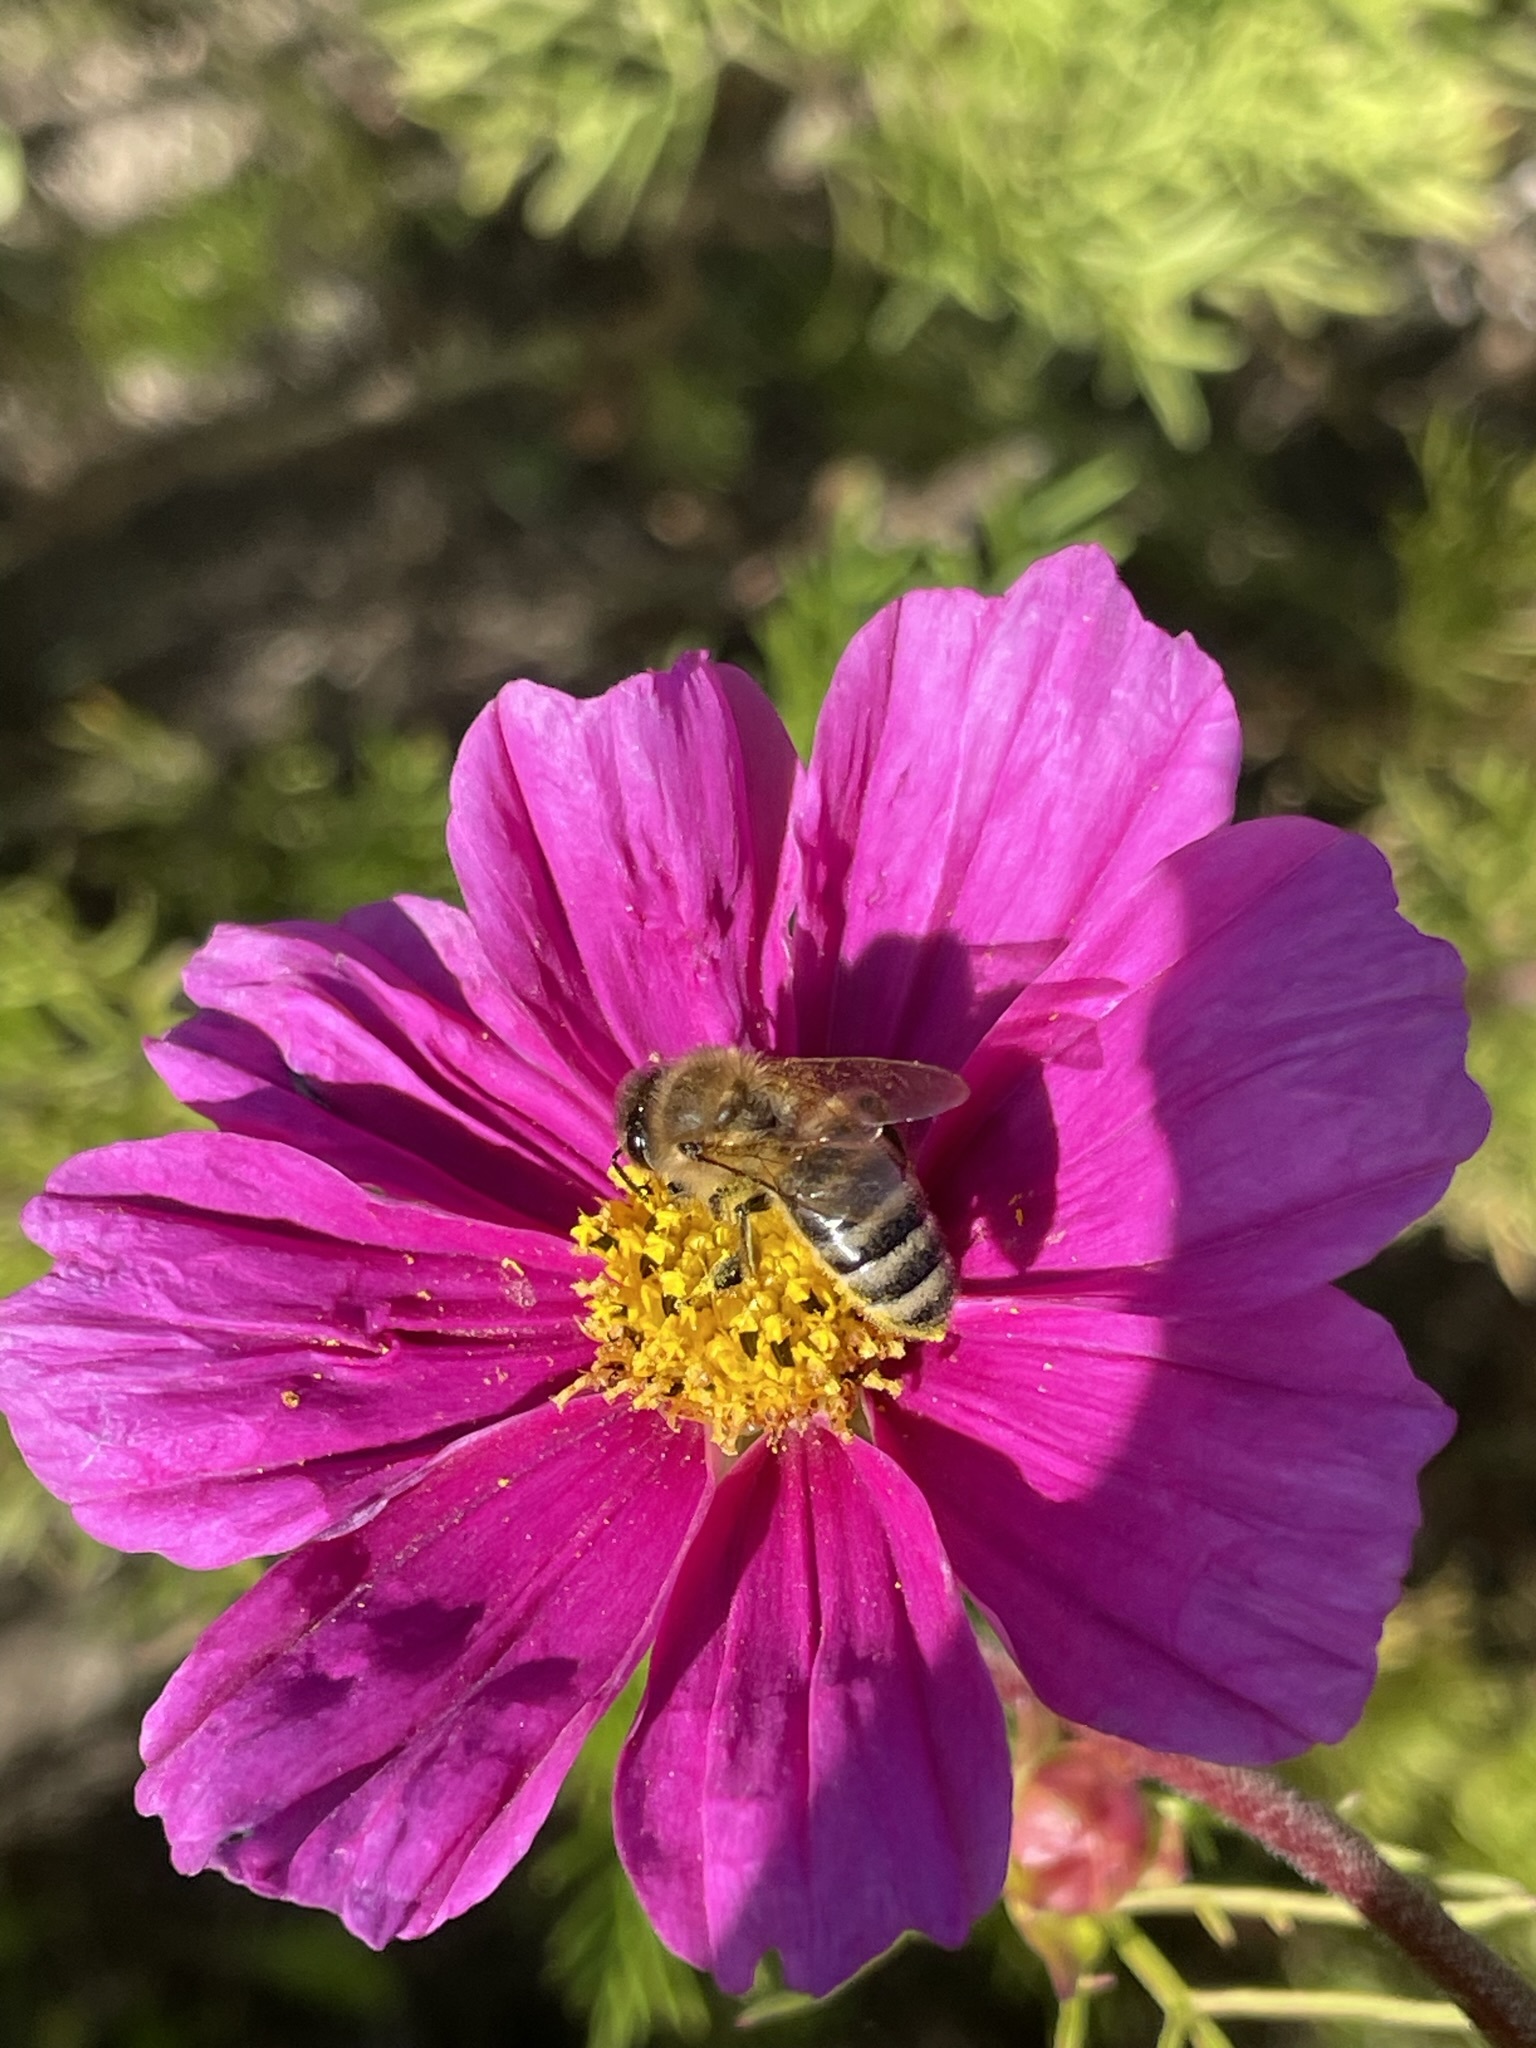 Western honey bee on a pink and yellow flower